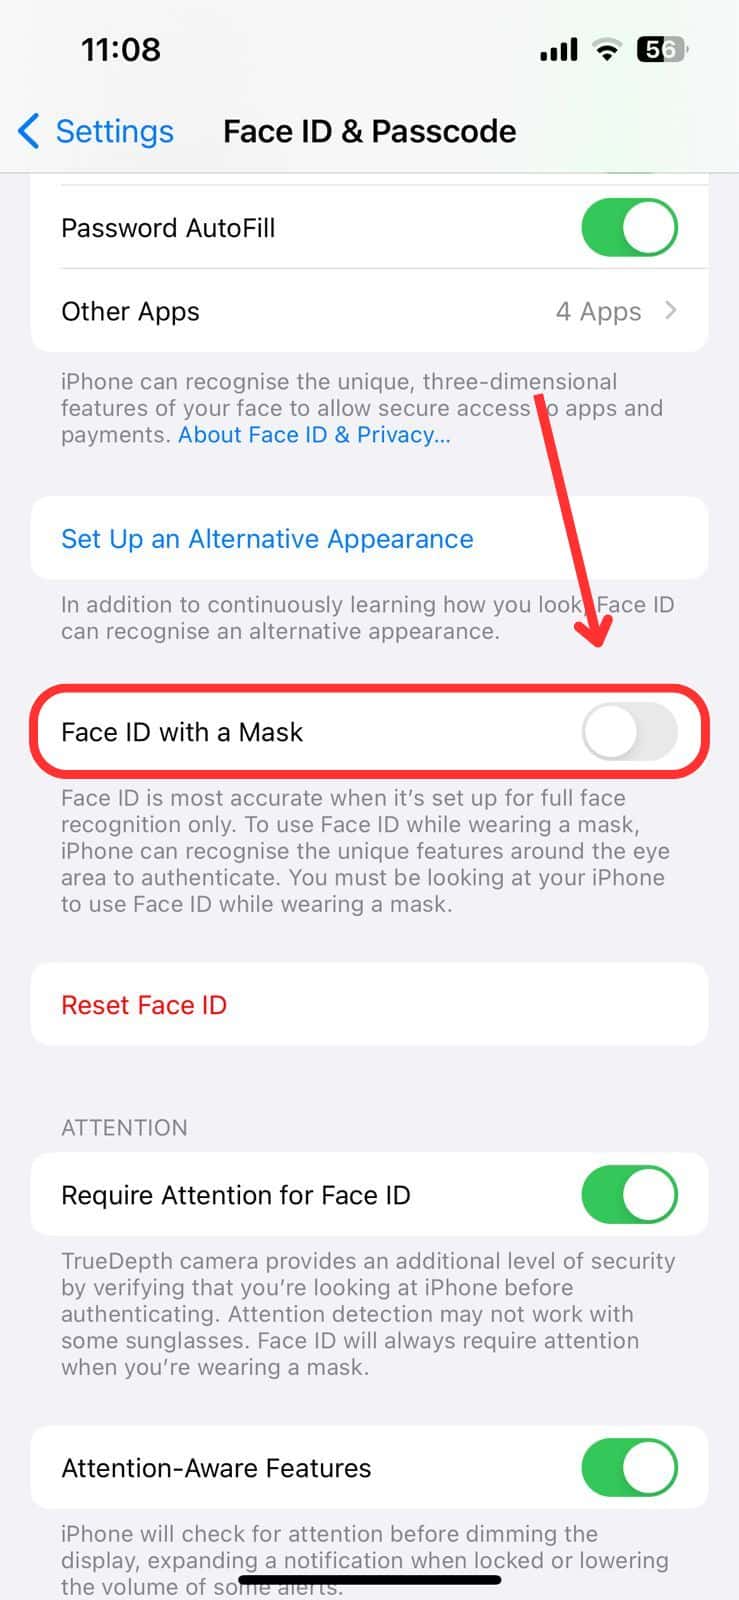 Turn off Face ID with a Mask